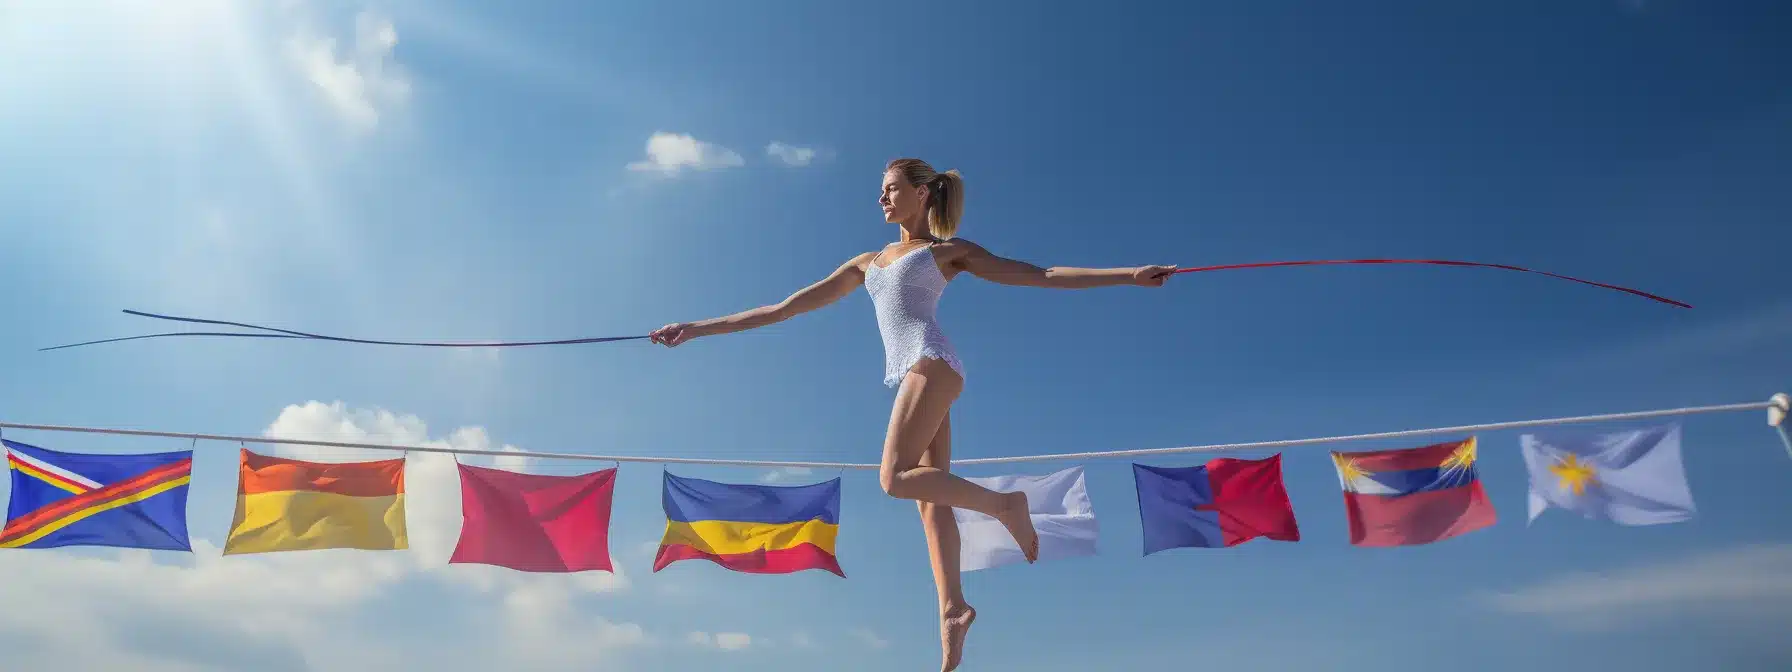 A Ballet Dancer Gracefully Balancing On A Tightrope Between Two Flags Representing Global Unity And Regional Uniqueness.